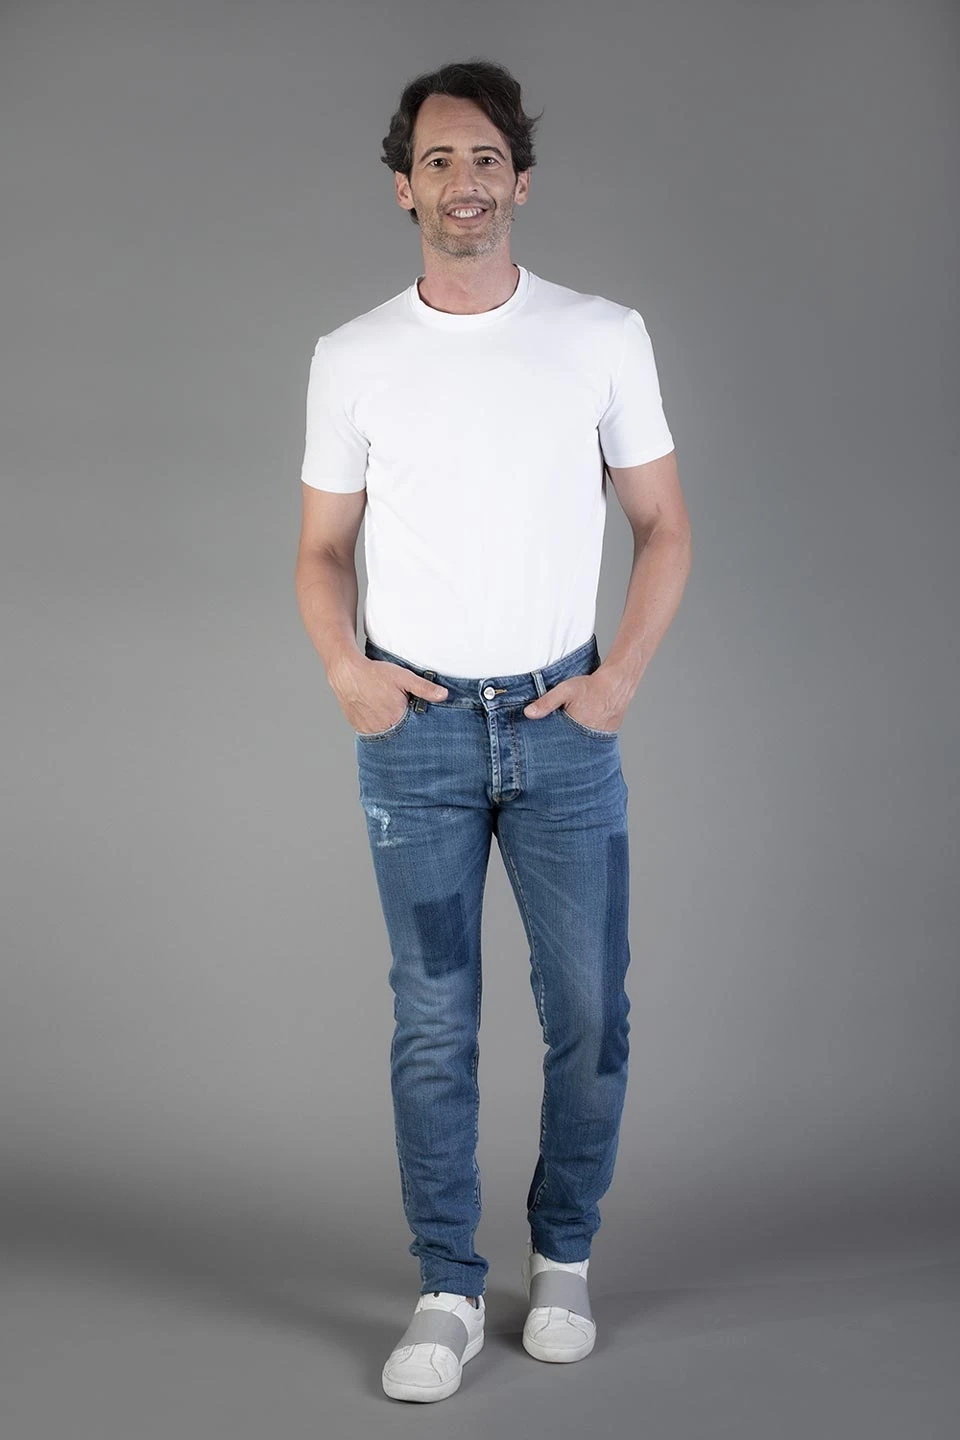 Denim V10 Fuoriclasse High Quality Jeans Made In Italy By Skilled ...